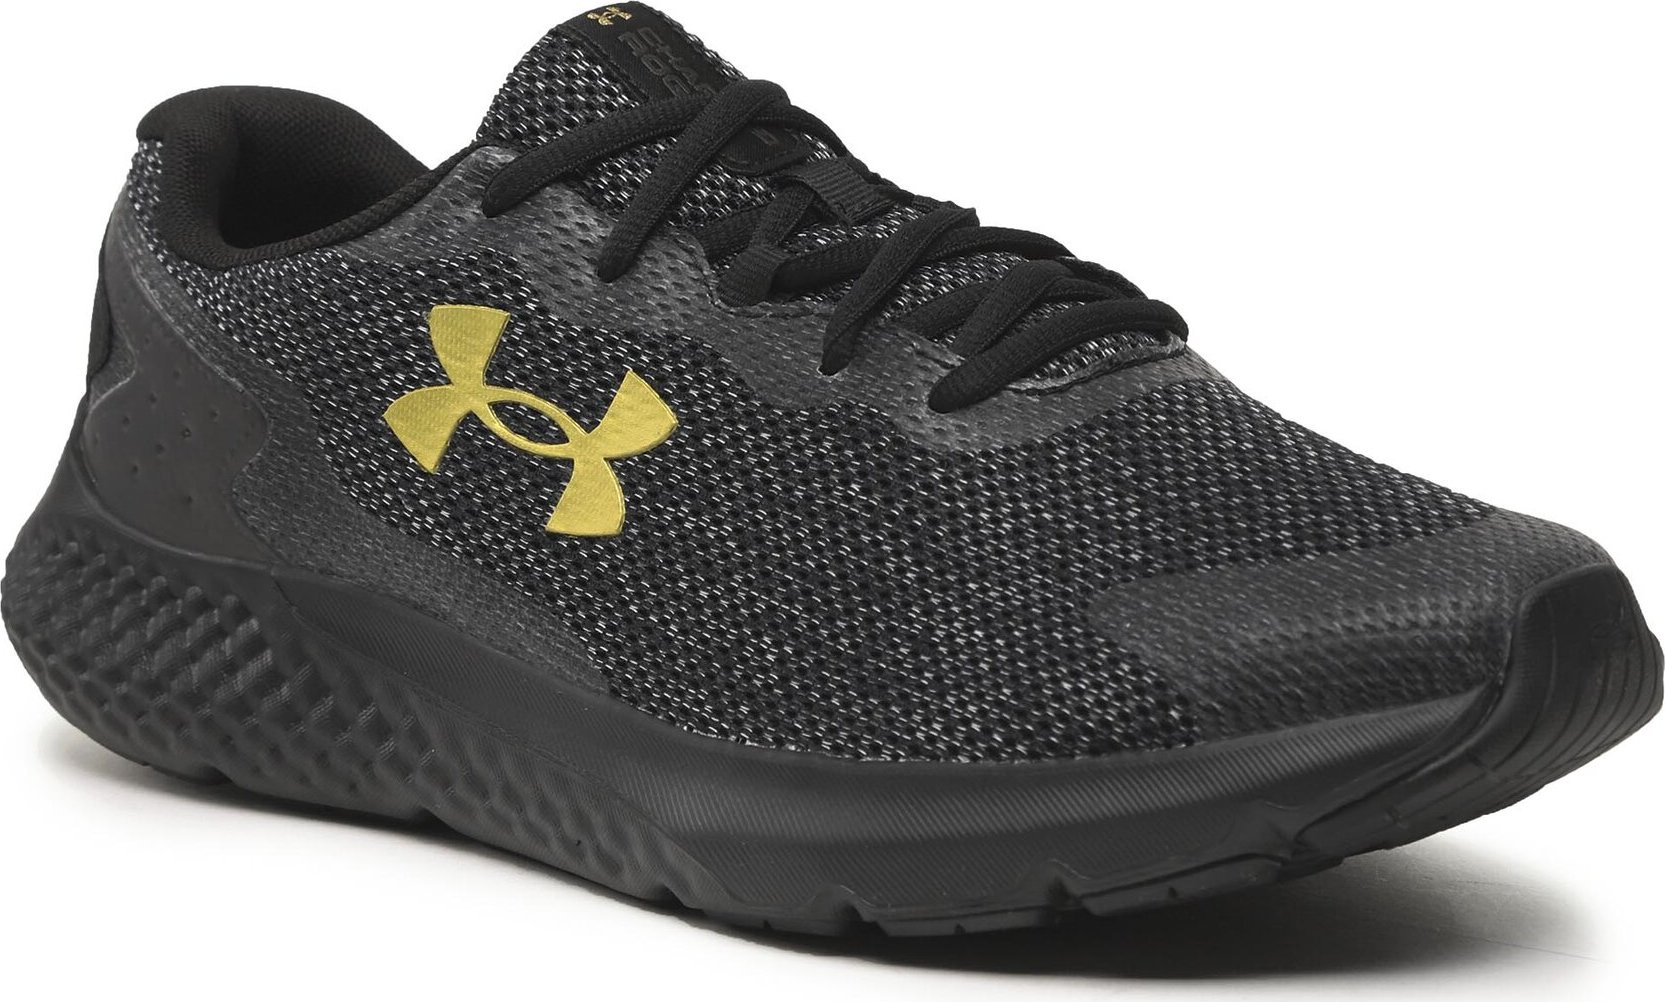 Boty Under Armour Ua Charged Rogue 3 Knit 3026140-002 Blk/Blk